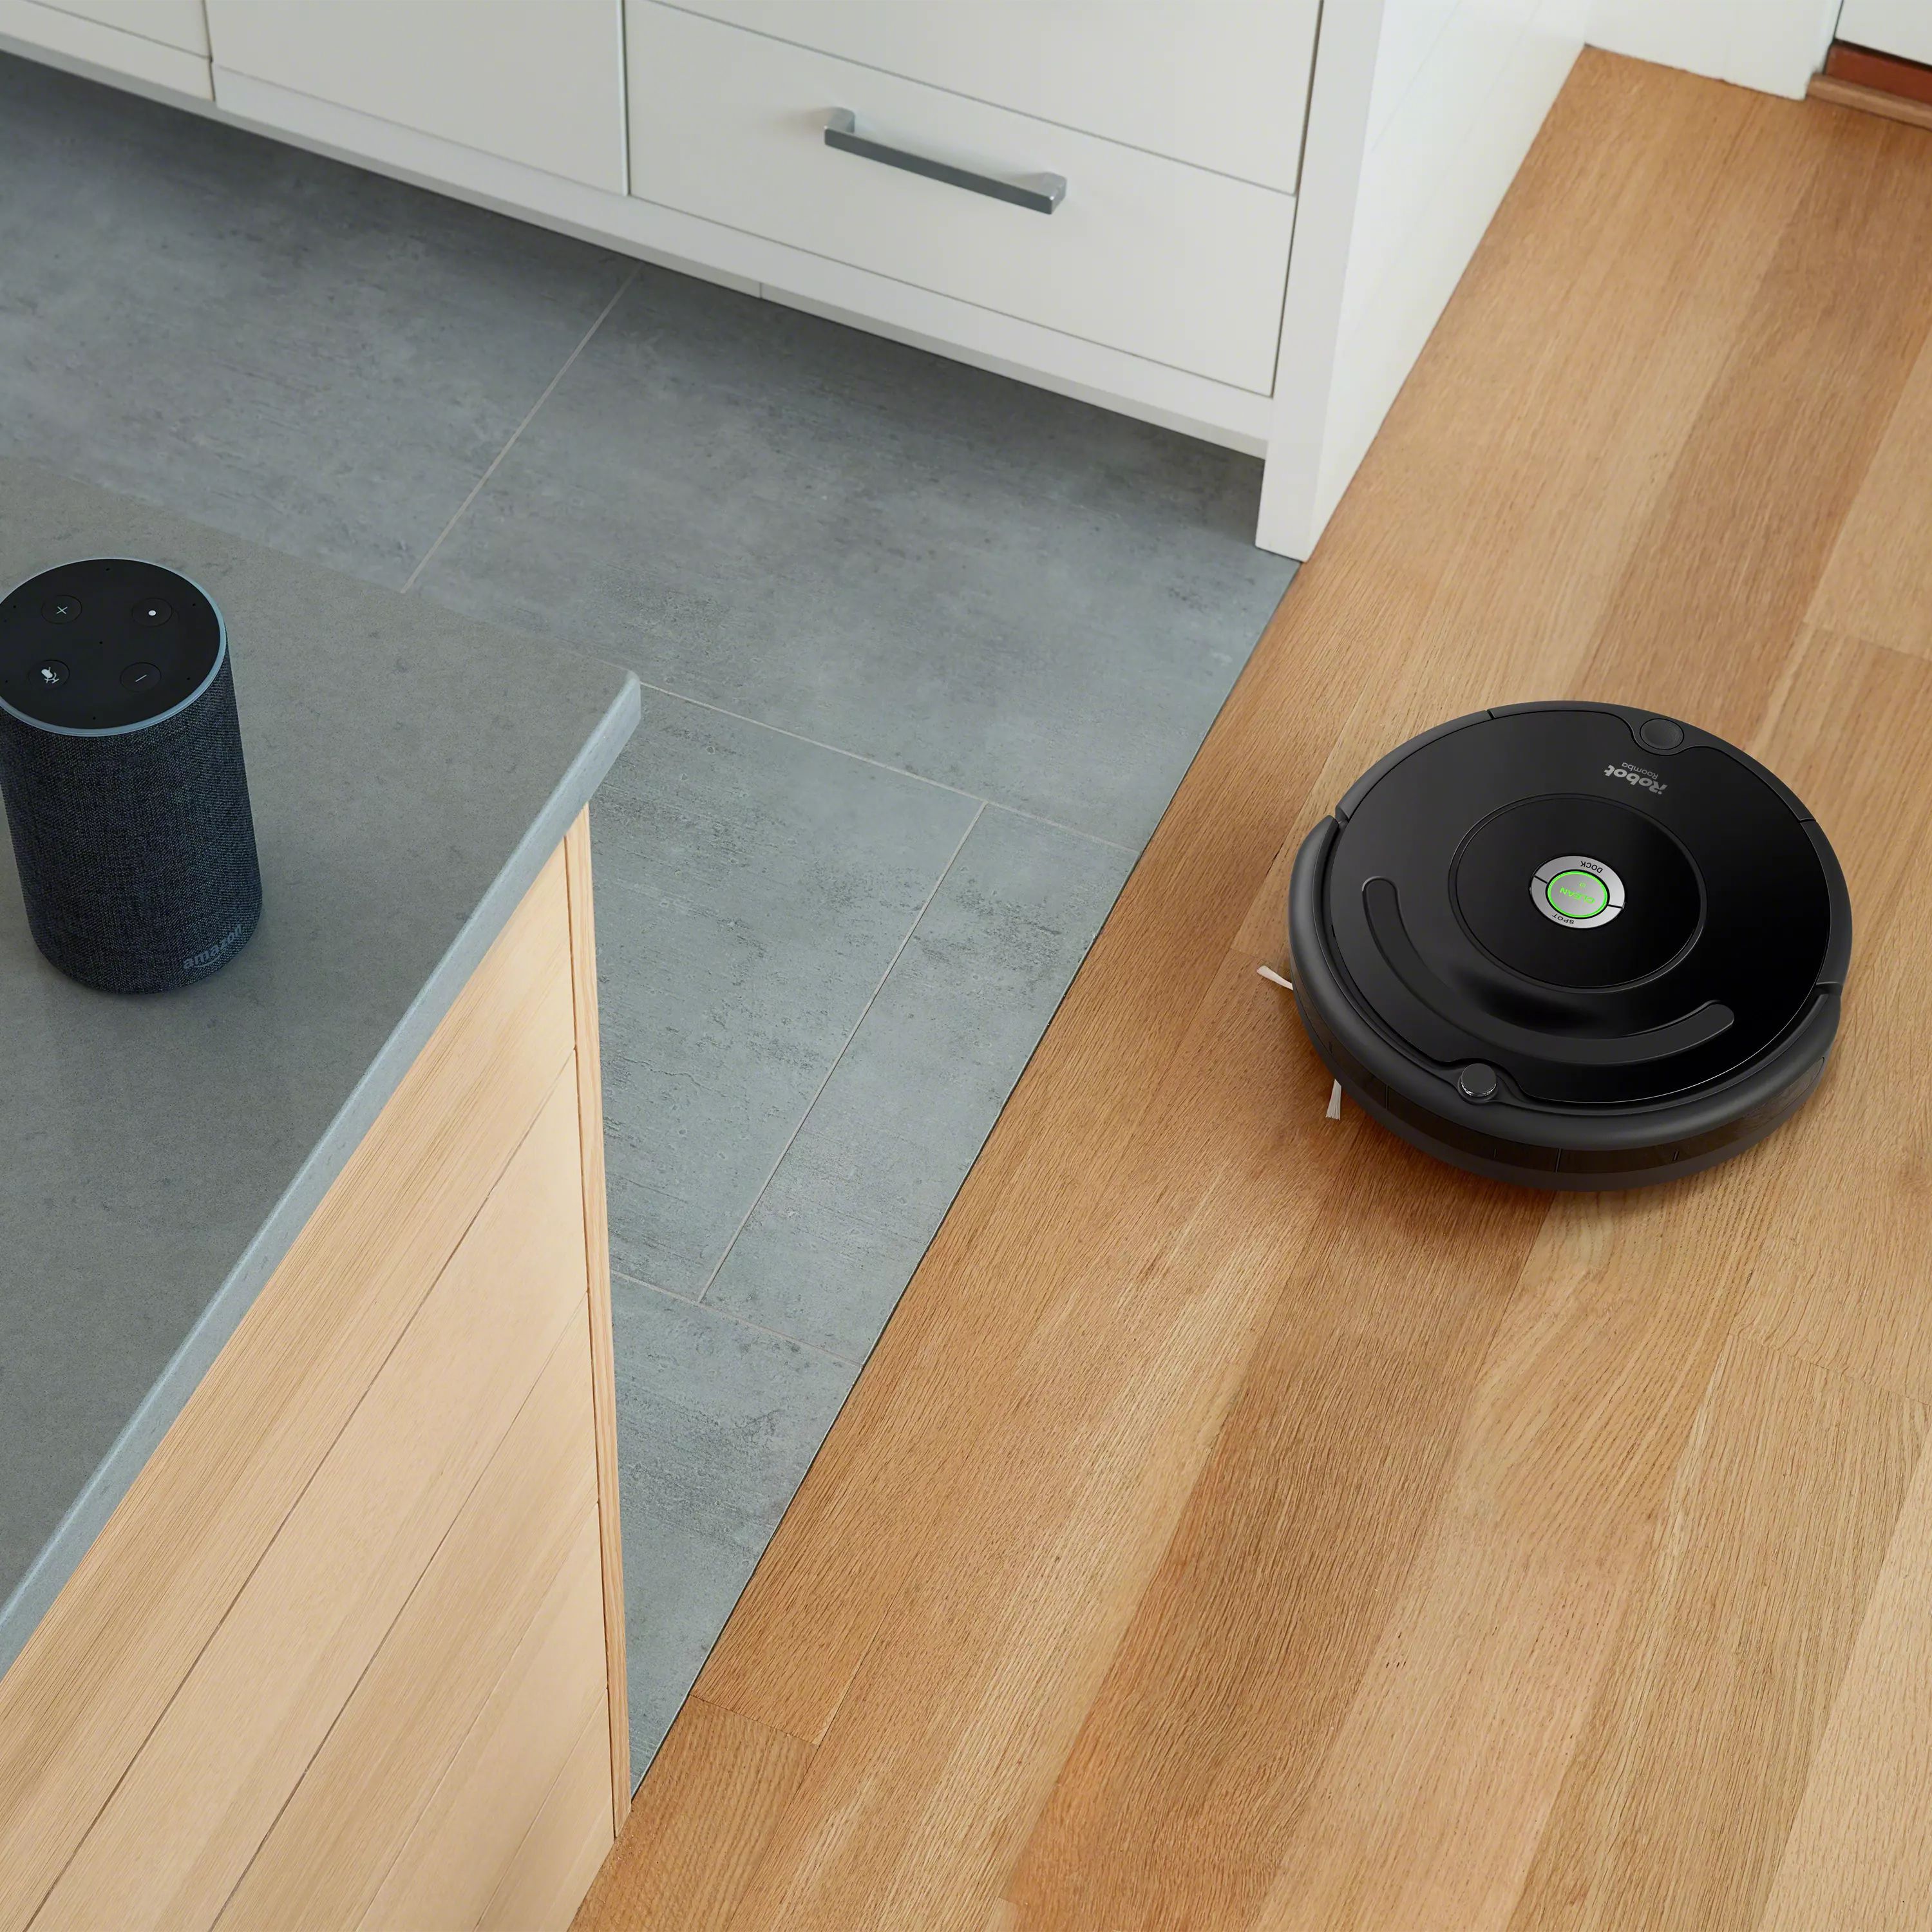 Works with Alexa iRobot Roomba 675 Robot Vacuum-Wi-Fi Connectivity Self-Charging Carpets Good for Pet Hair Hard Floors 